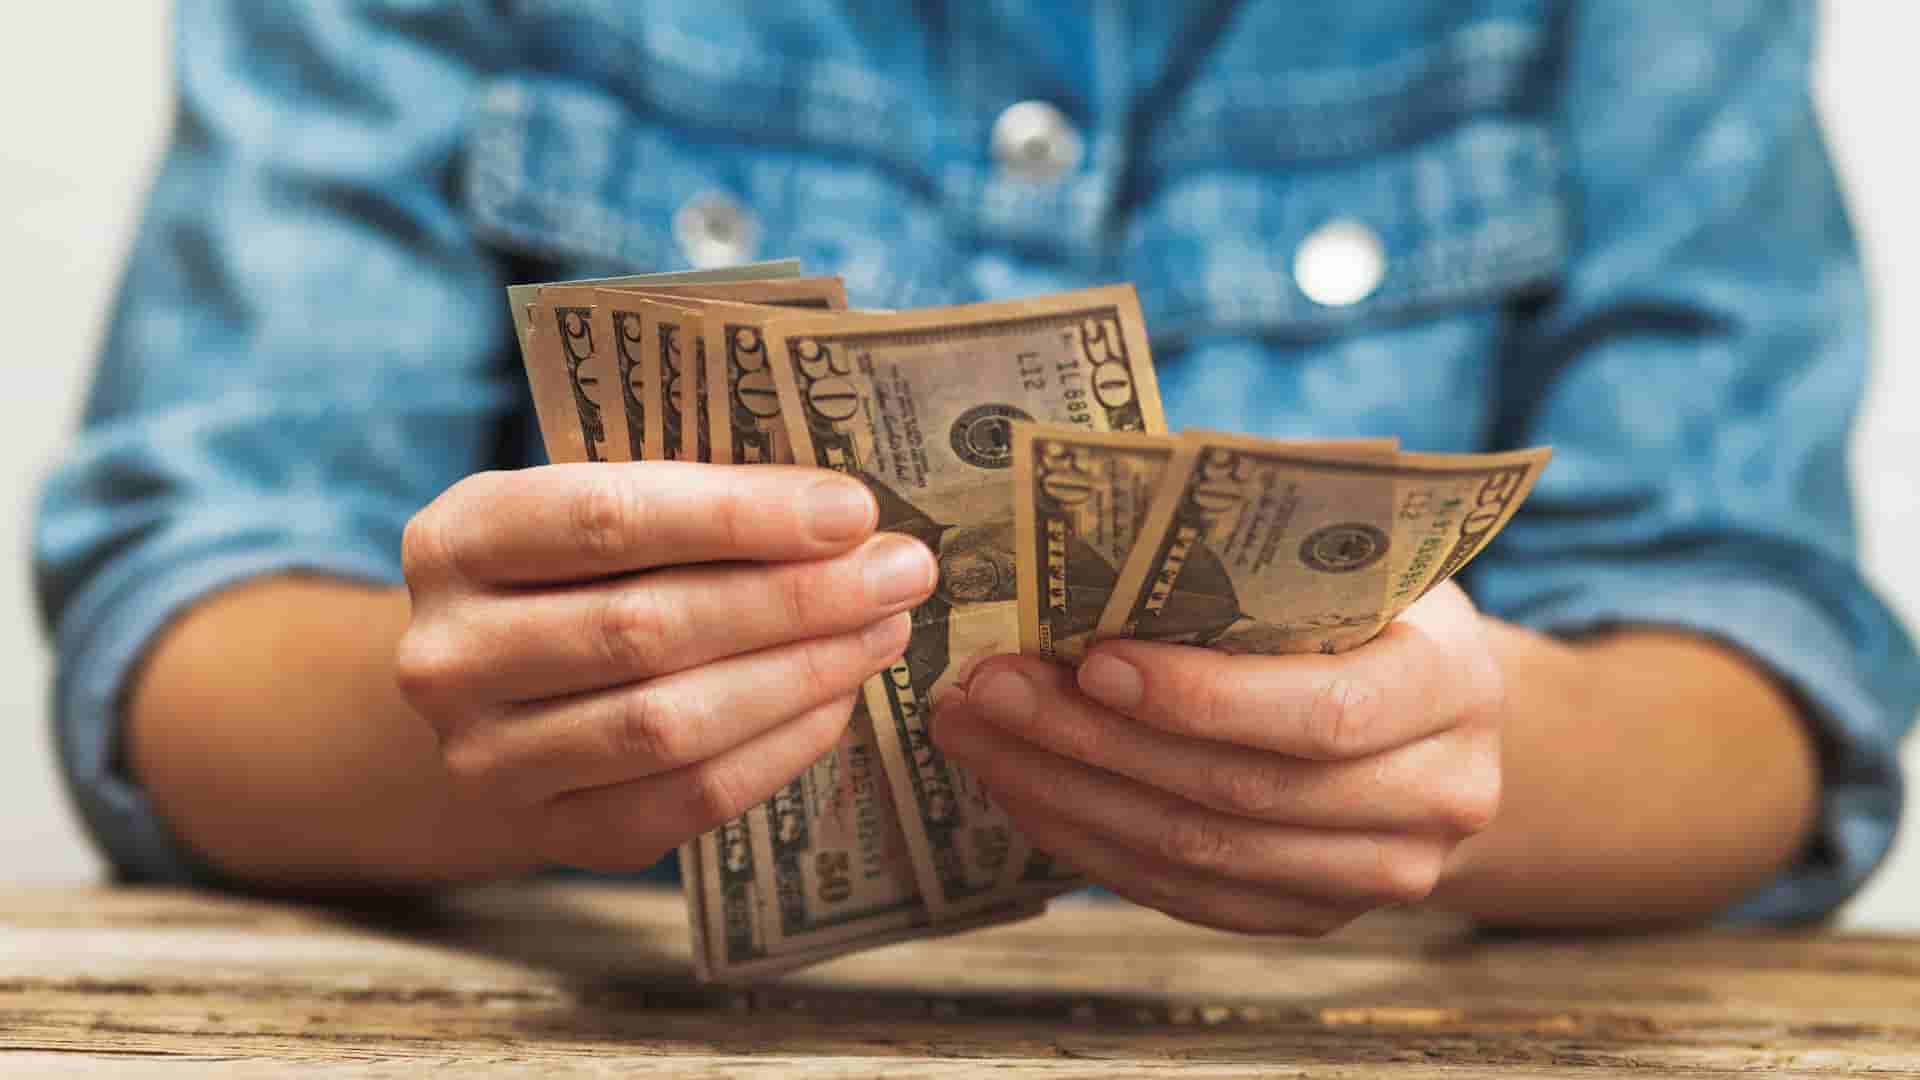 California recently passed two guaranteed income programs, one in El Monte and the other in Sacramento. The payments for both programs are intended for families who have low income and help them afford their “basic needs” such as food and utilities, despite the inflation that is happening in the state. 